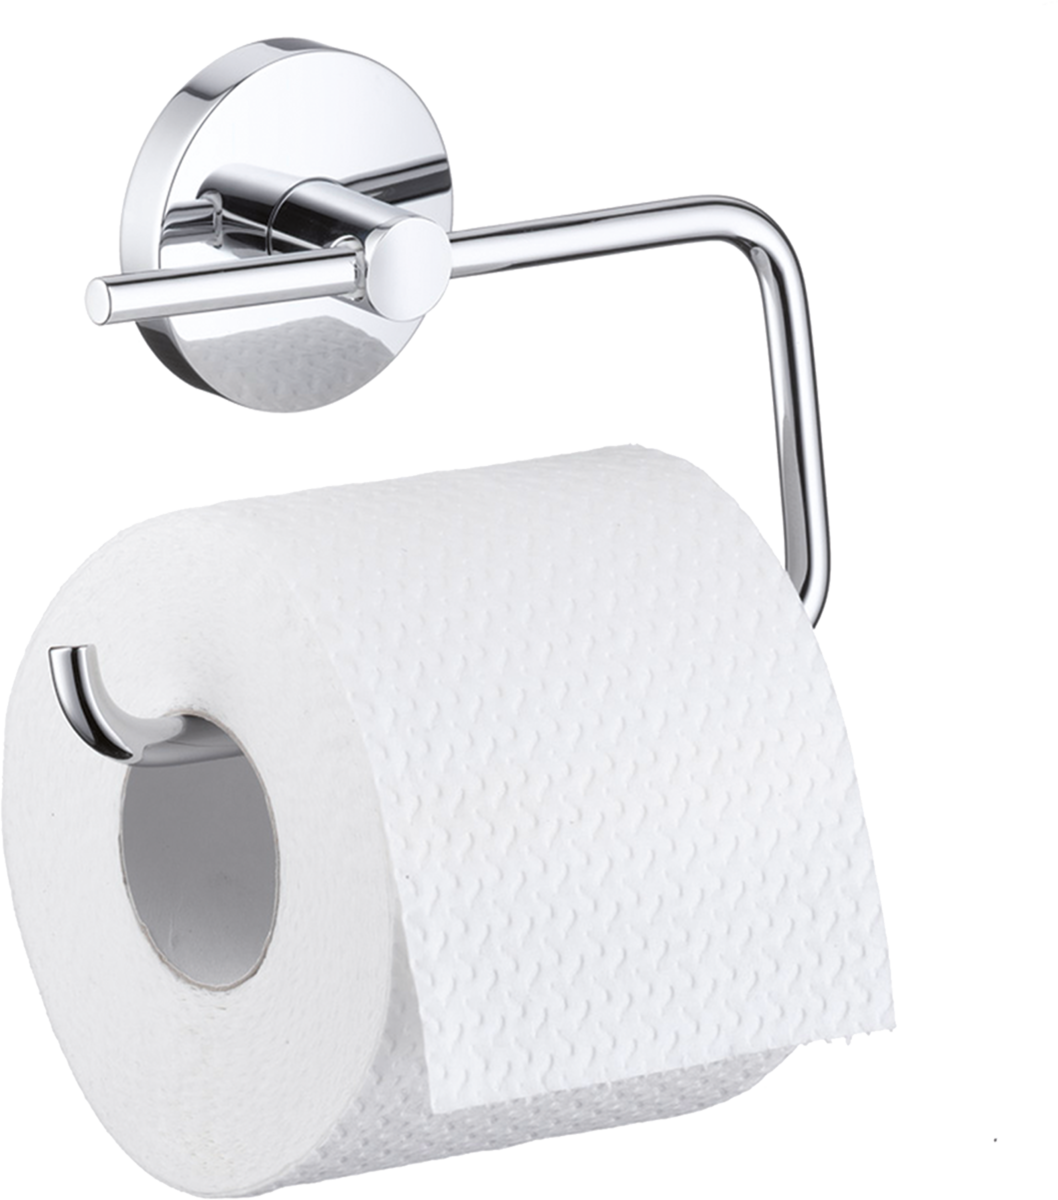 hansgrohe Accessories: Logis, Toilet paper holder, Item No. 40526000